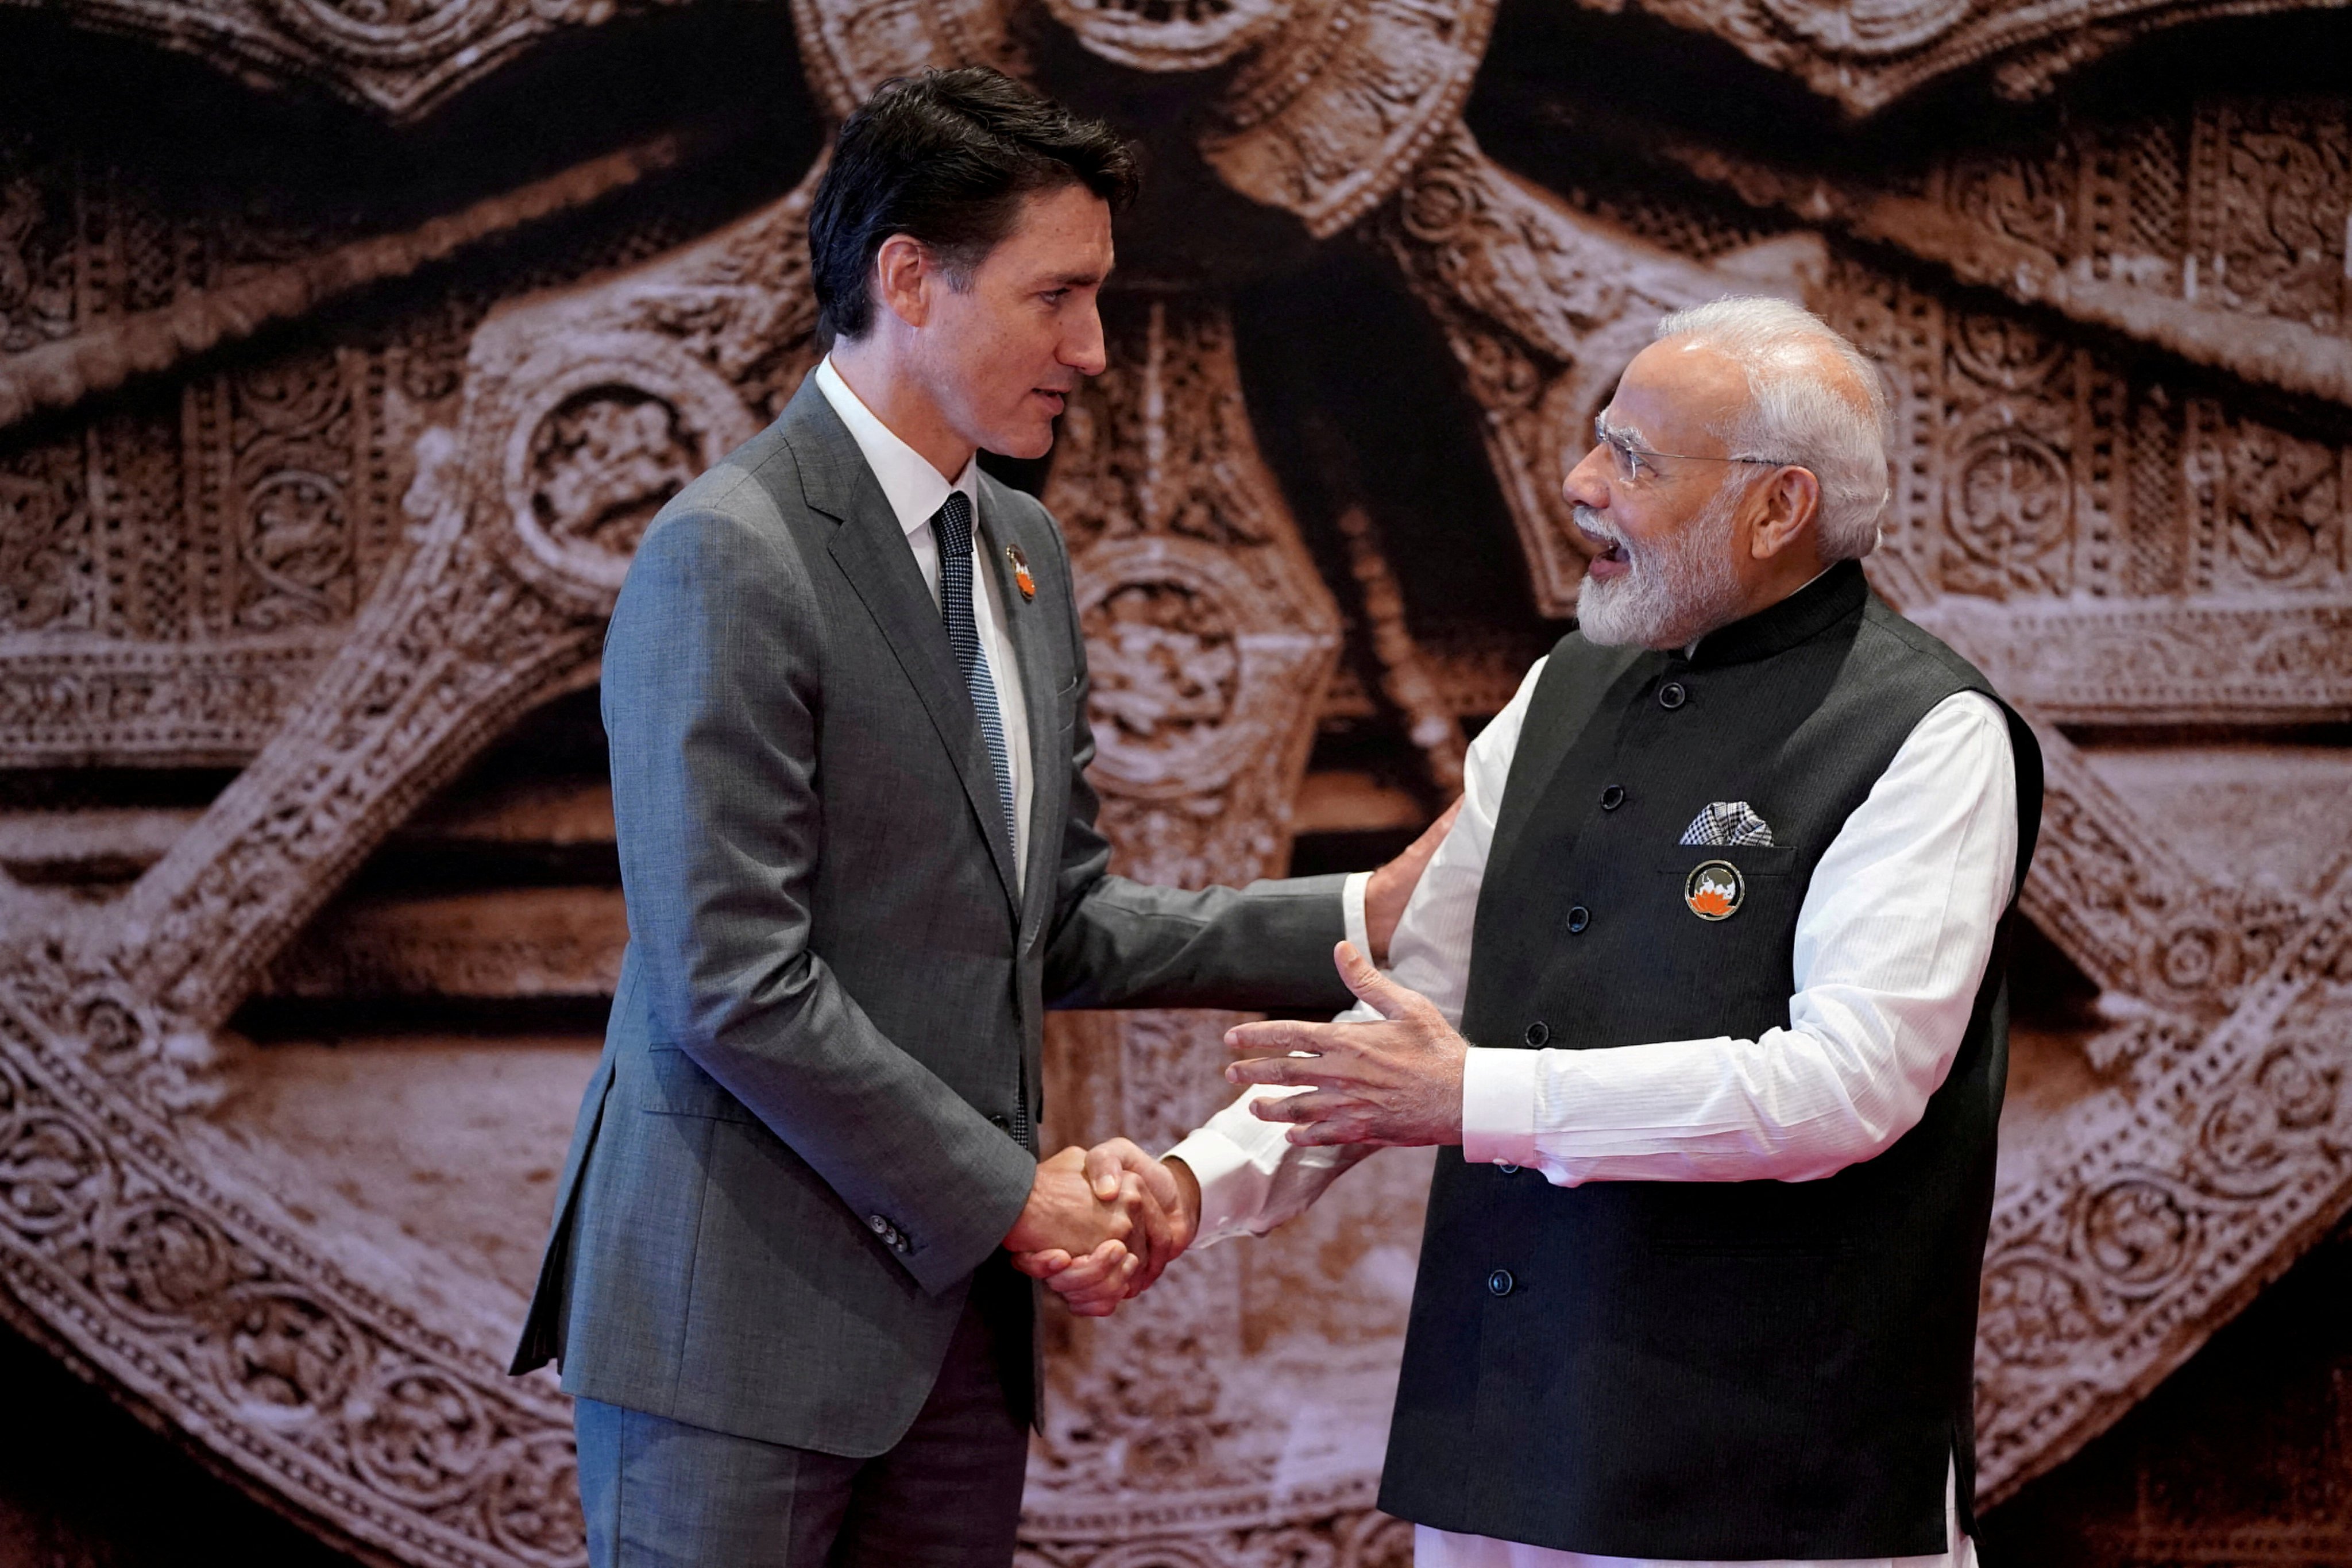 Indian Prime Minister Narendra Modi (right) welcomes Canadian Prime Minister Justin Trudeau on his arrival at the Bharat Mandapam convention centre for the Group of 20 Summit in New Delhi on September 9. Relations between Canada and India have rapidly turned sour in the aftermath of the assassination of Sikh activist Hardeep Singh Nijjar in Canada last month. Photo: Reuters